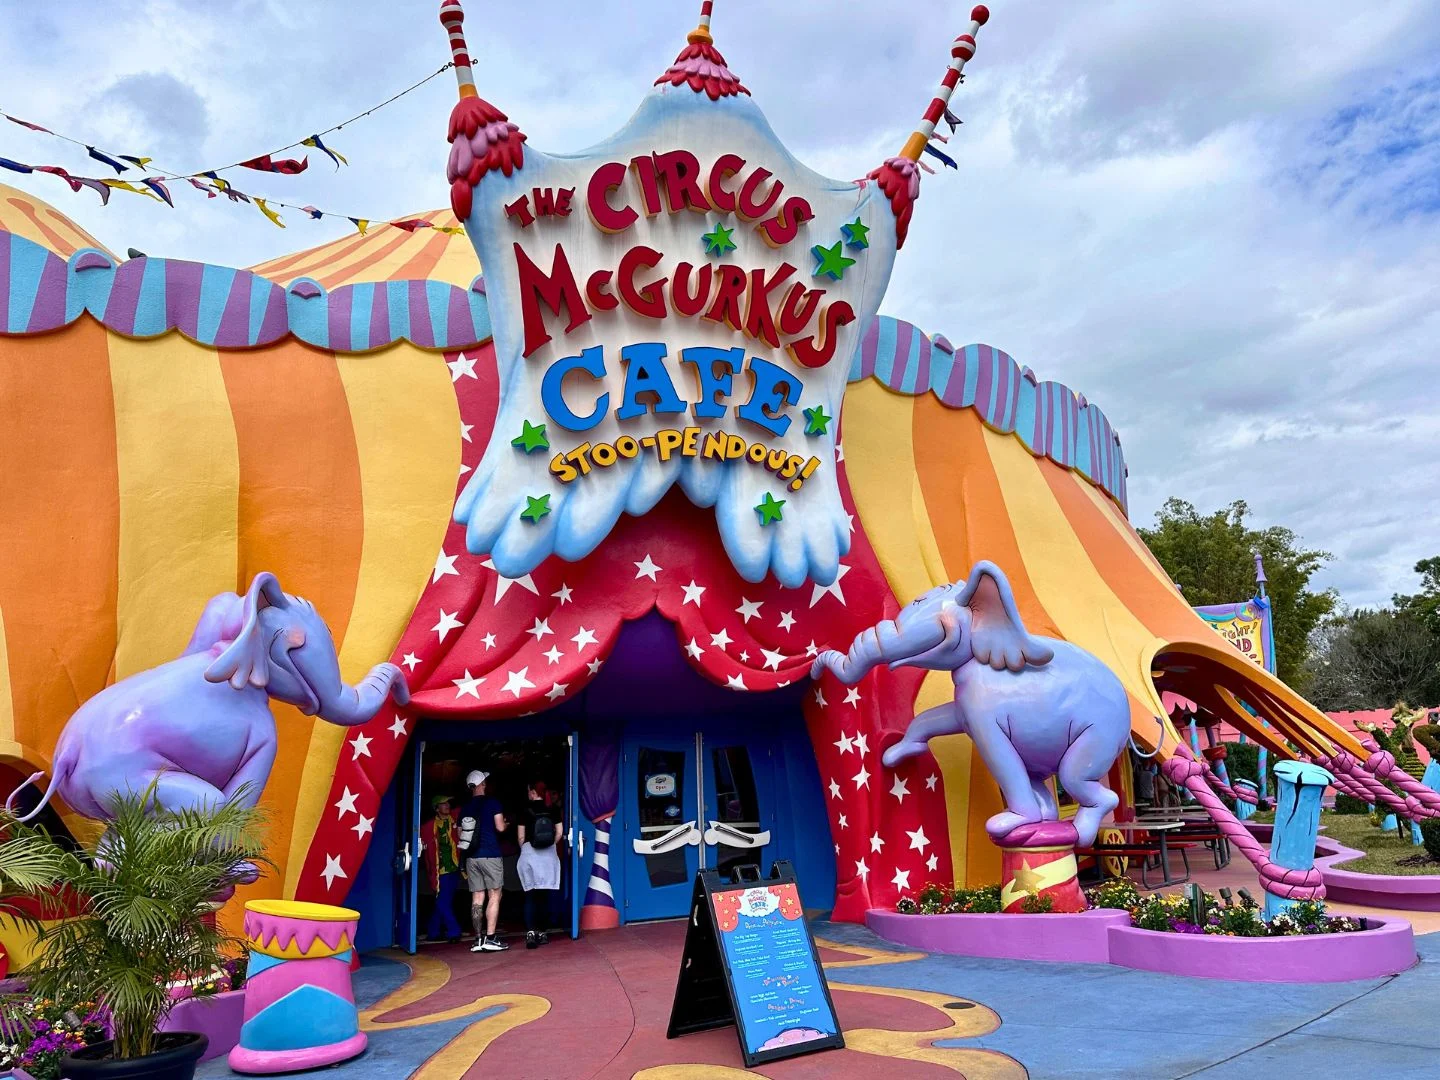 Image of Circus McGurkus Restaurant Entrance with two purple elephants on either side